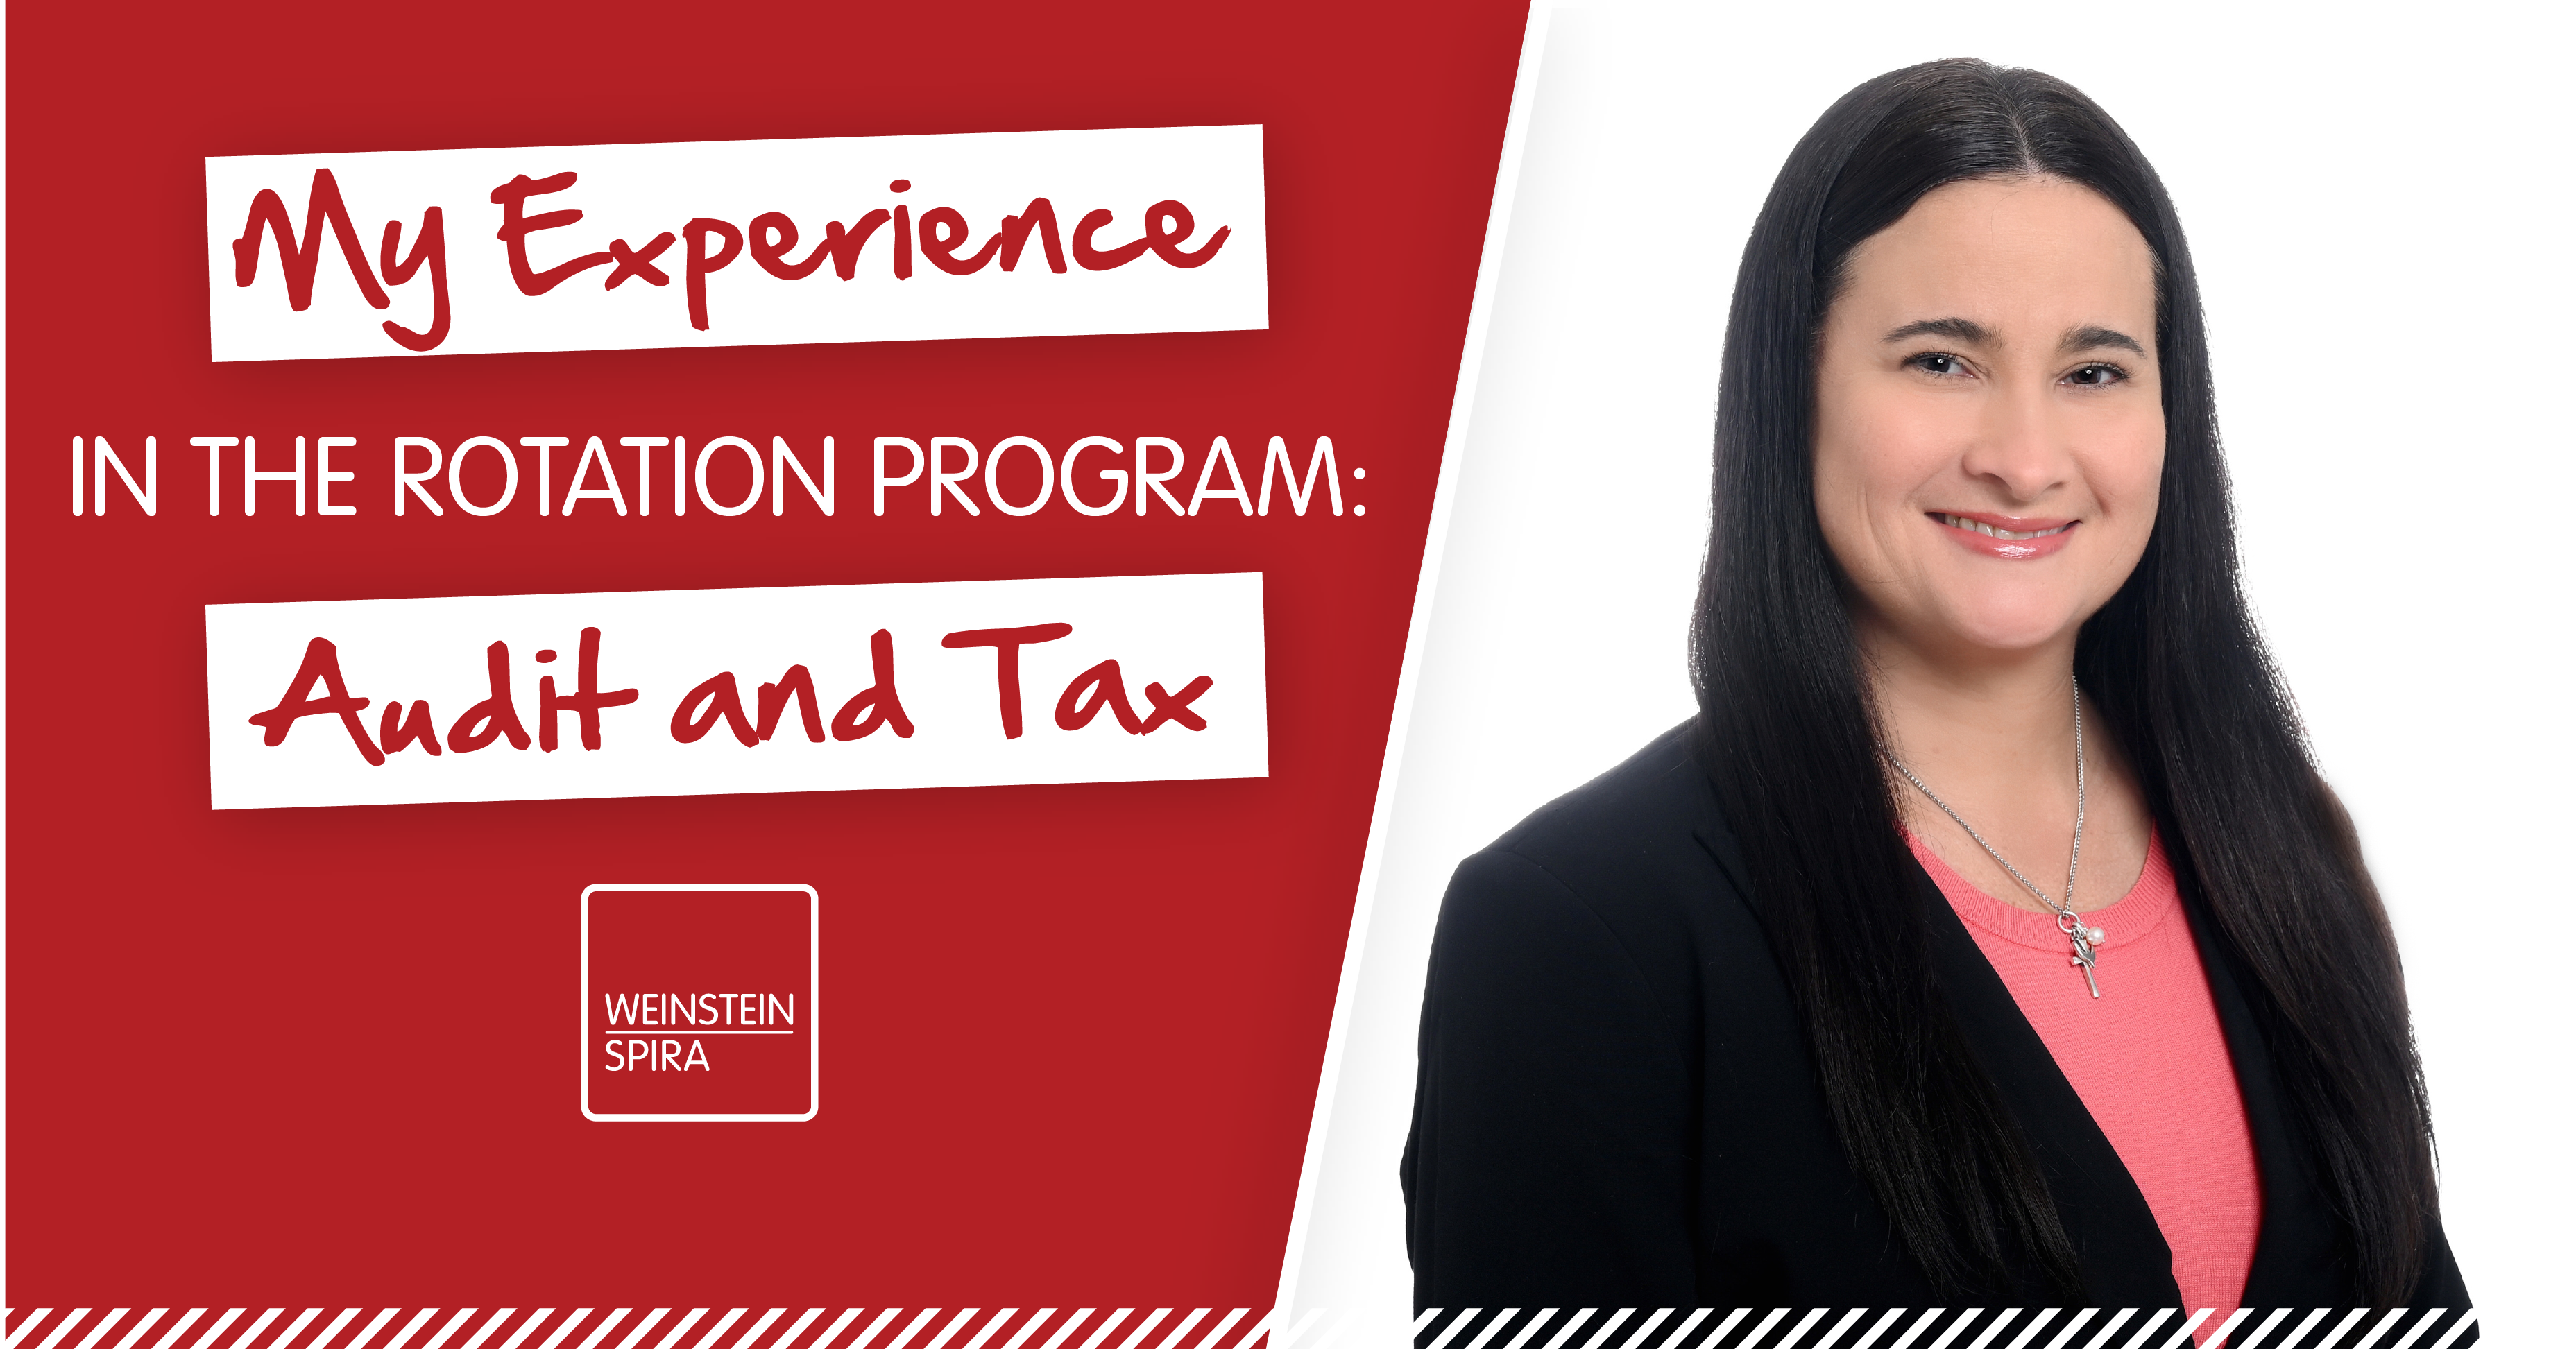 My Experience in the Rotation Program: Audit and Tax